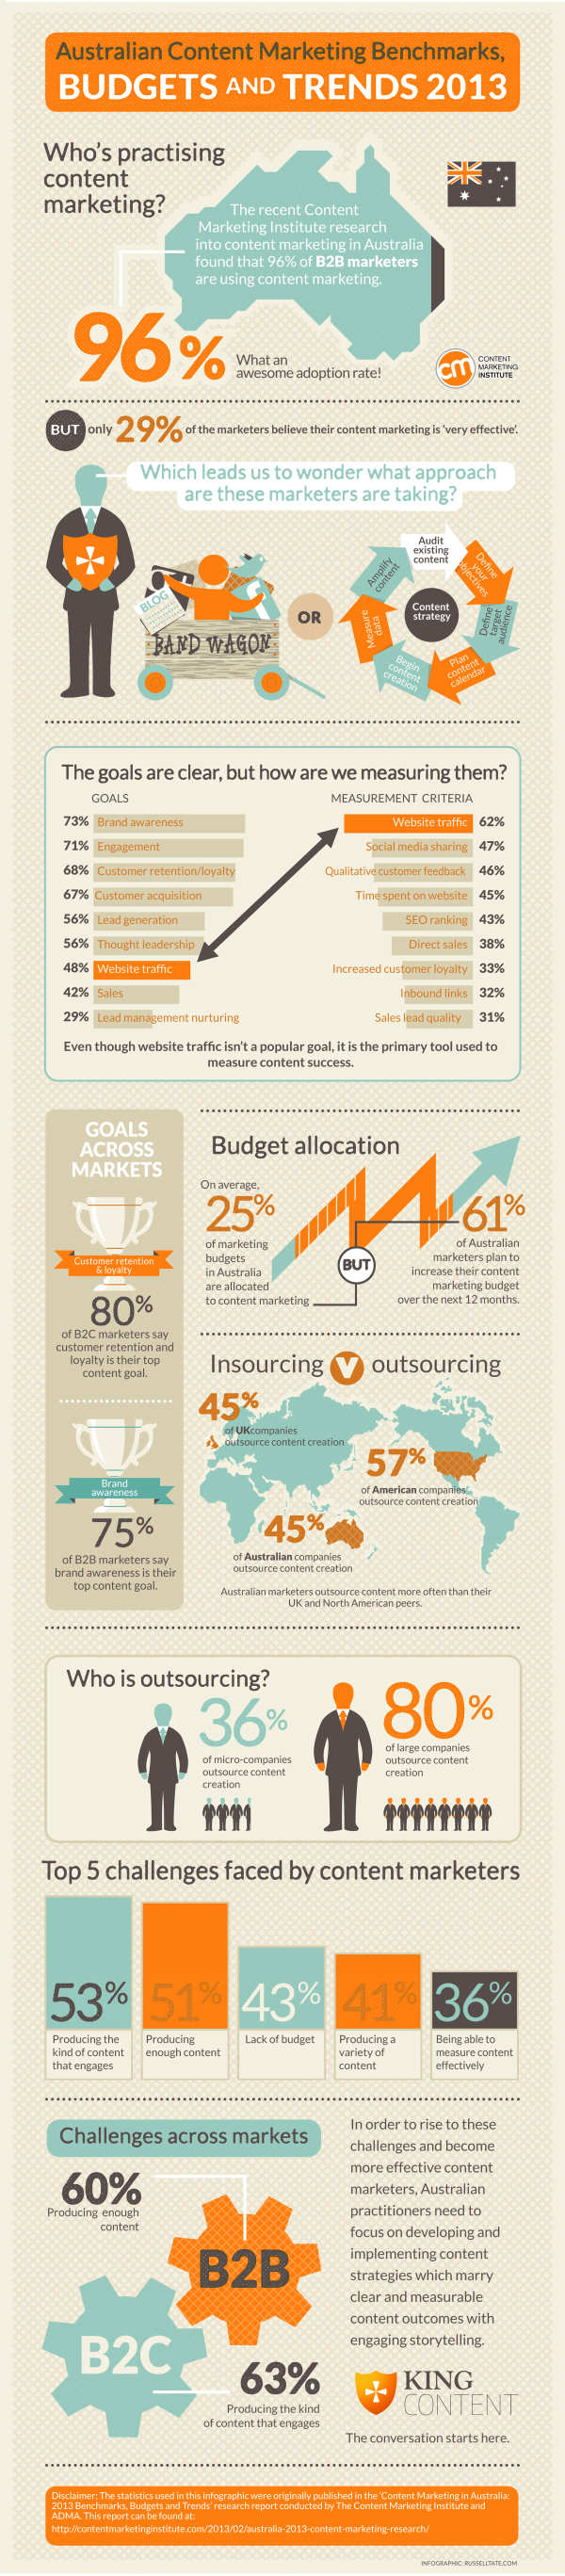 INFOGRAPHIC: Content Marketing Trends